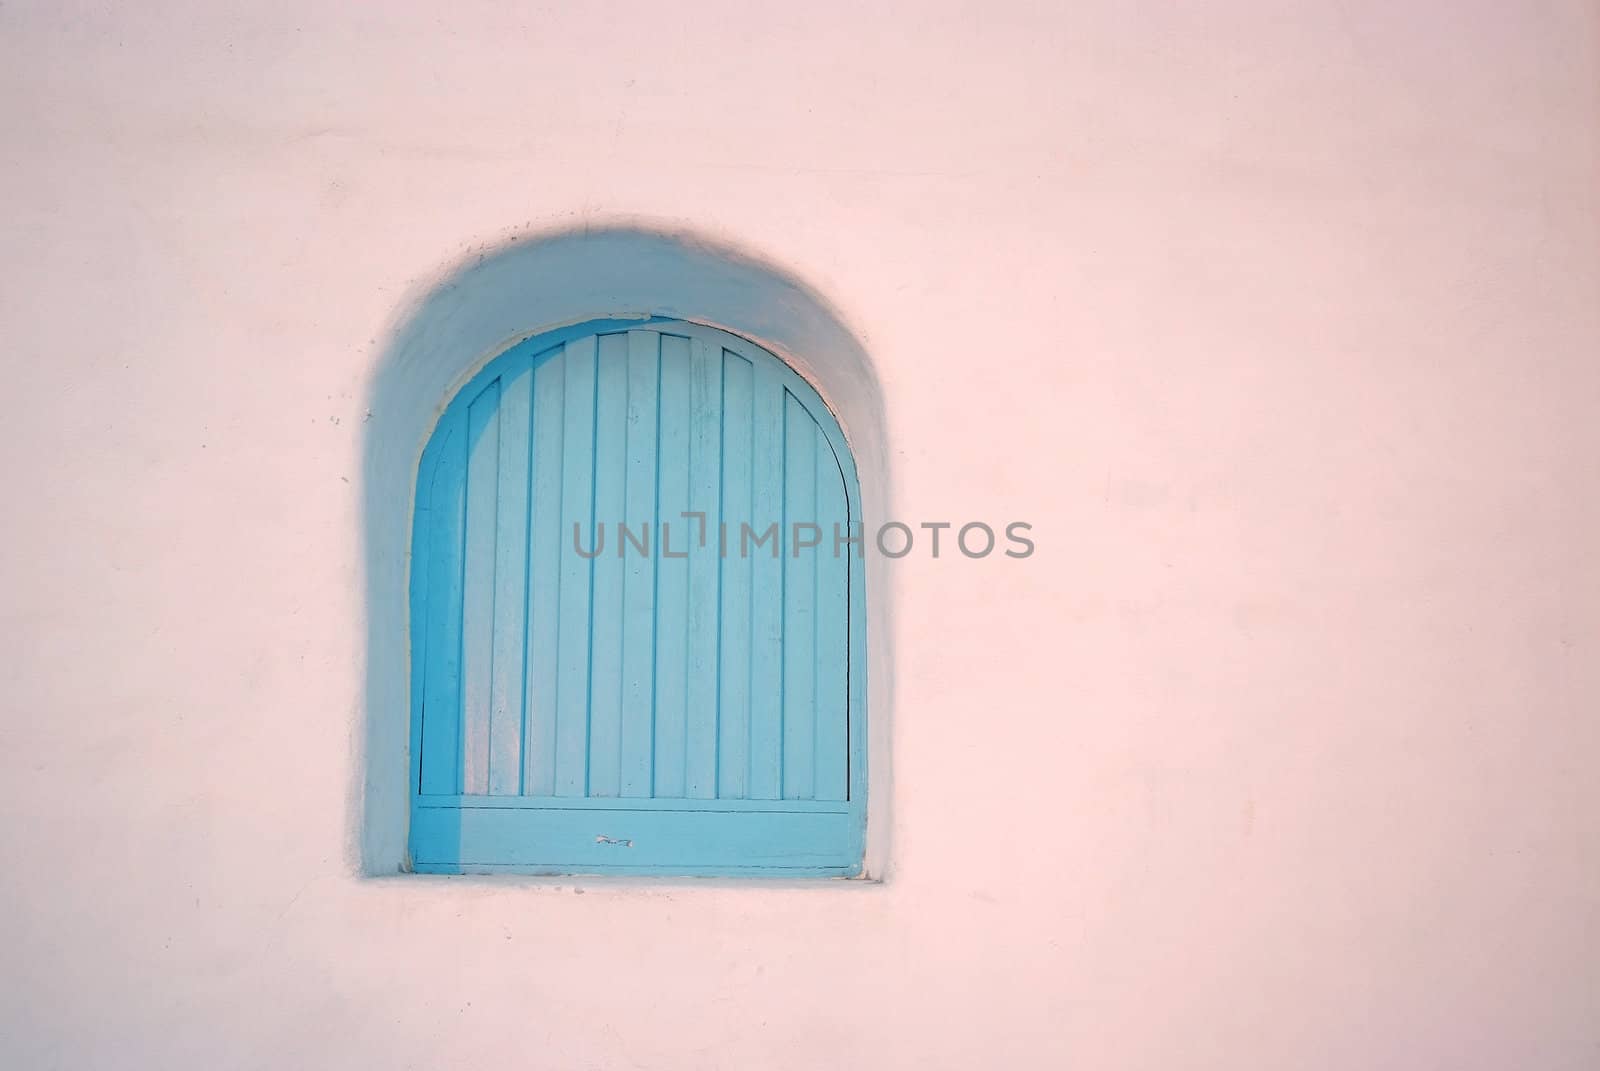 Vintage blue windows on the wall  by opasstudio